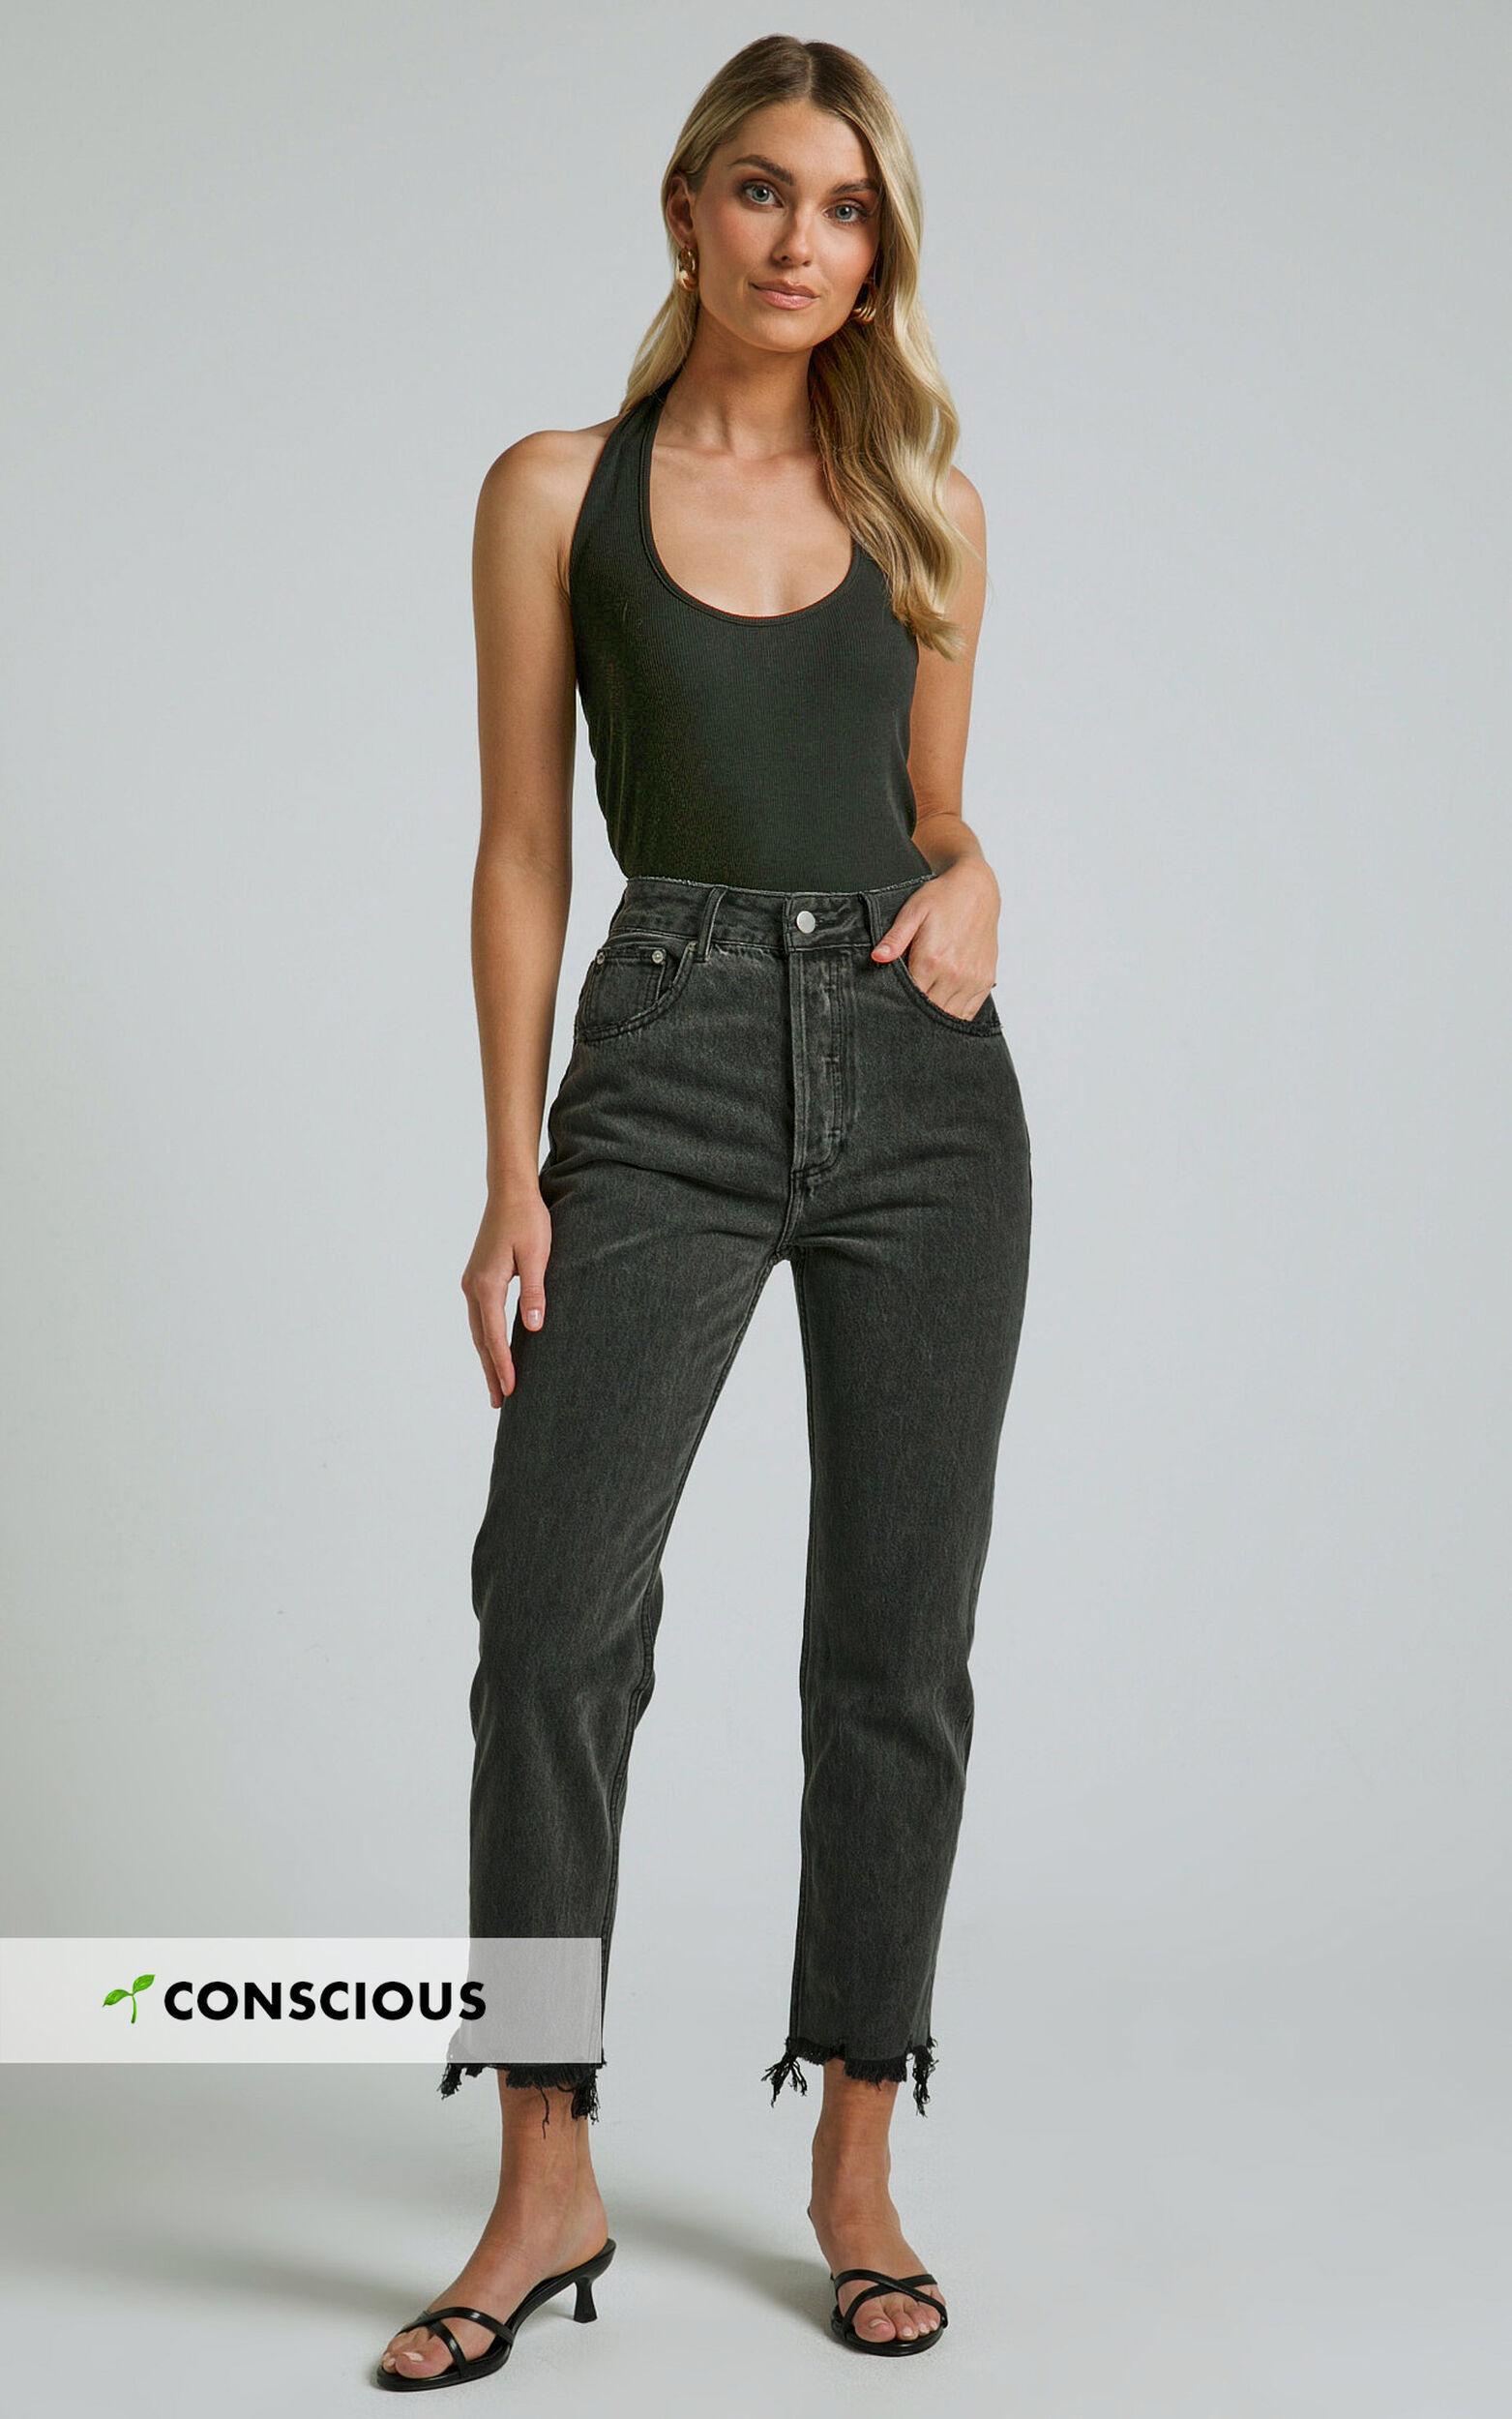 Zelrio Jeans - High Waisted Recycled Cotton Cropped Denim Jeans in Washed Black - 04, BLK1